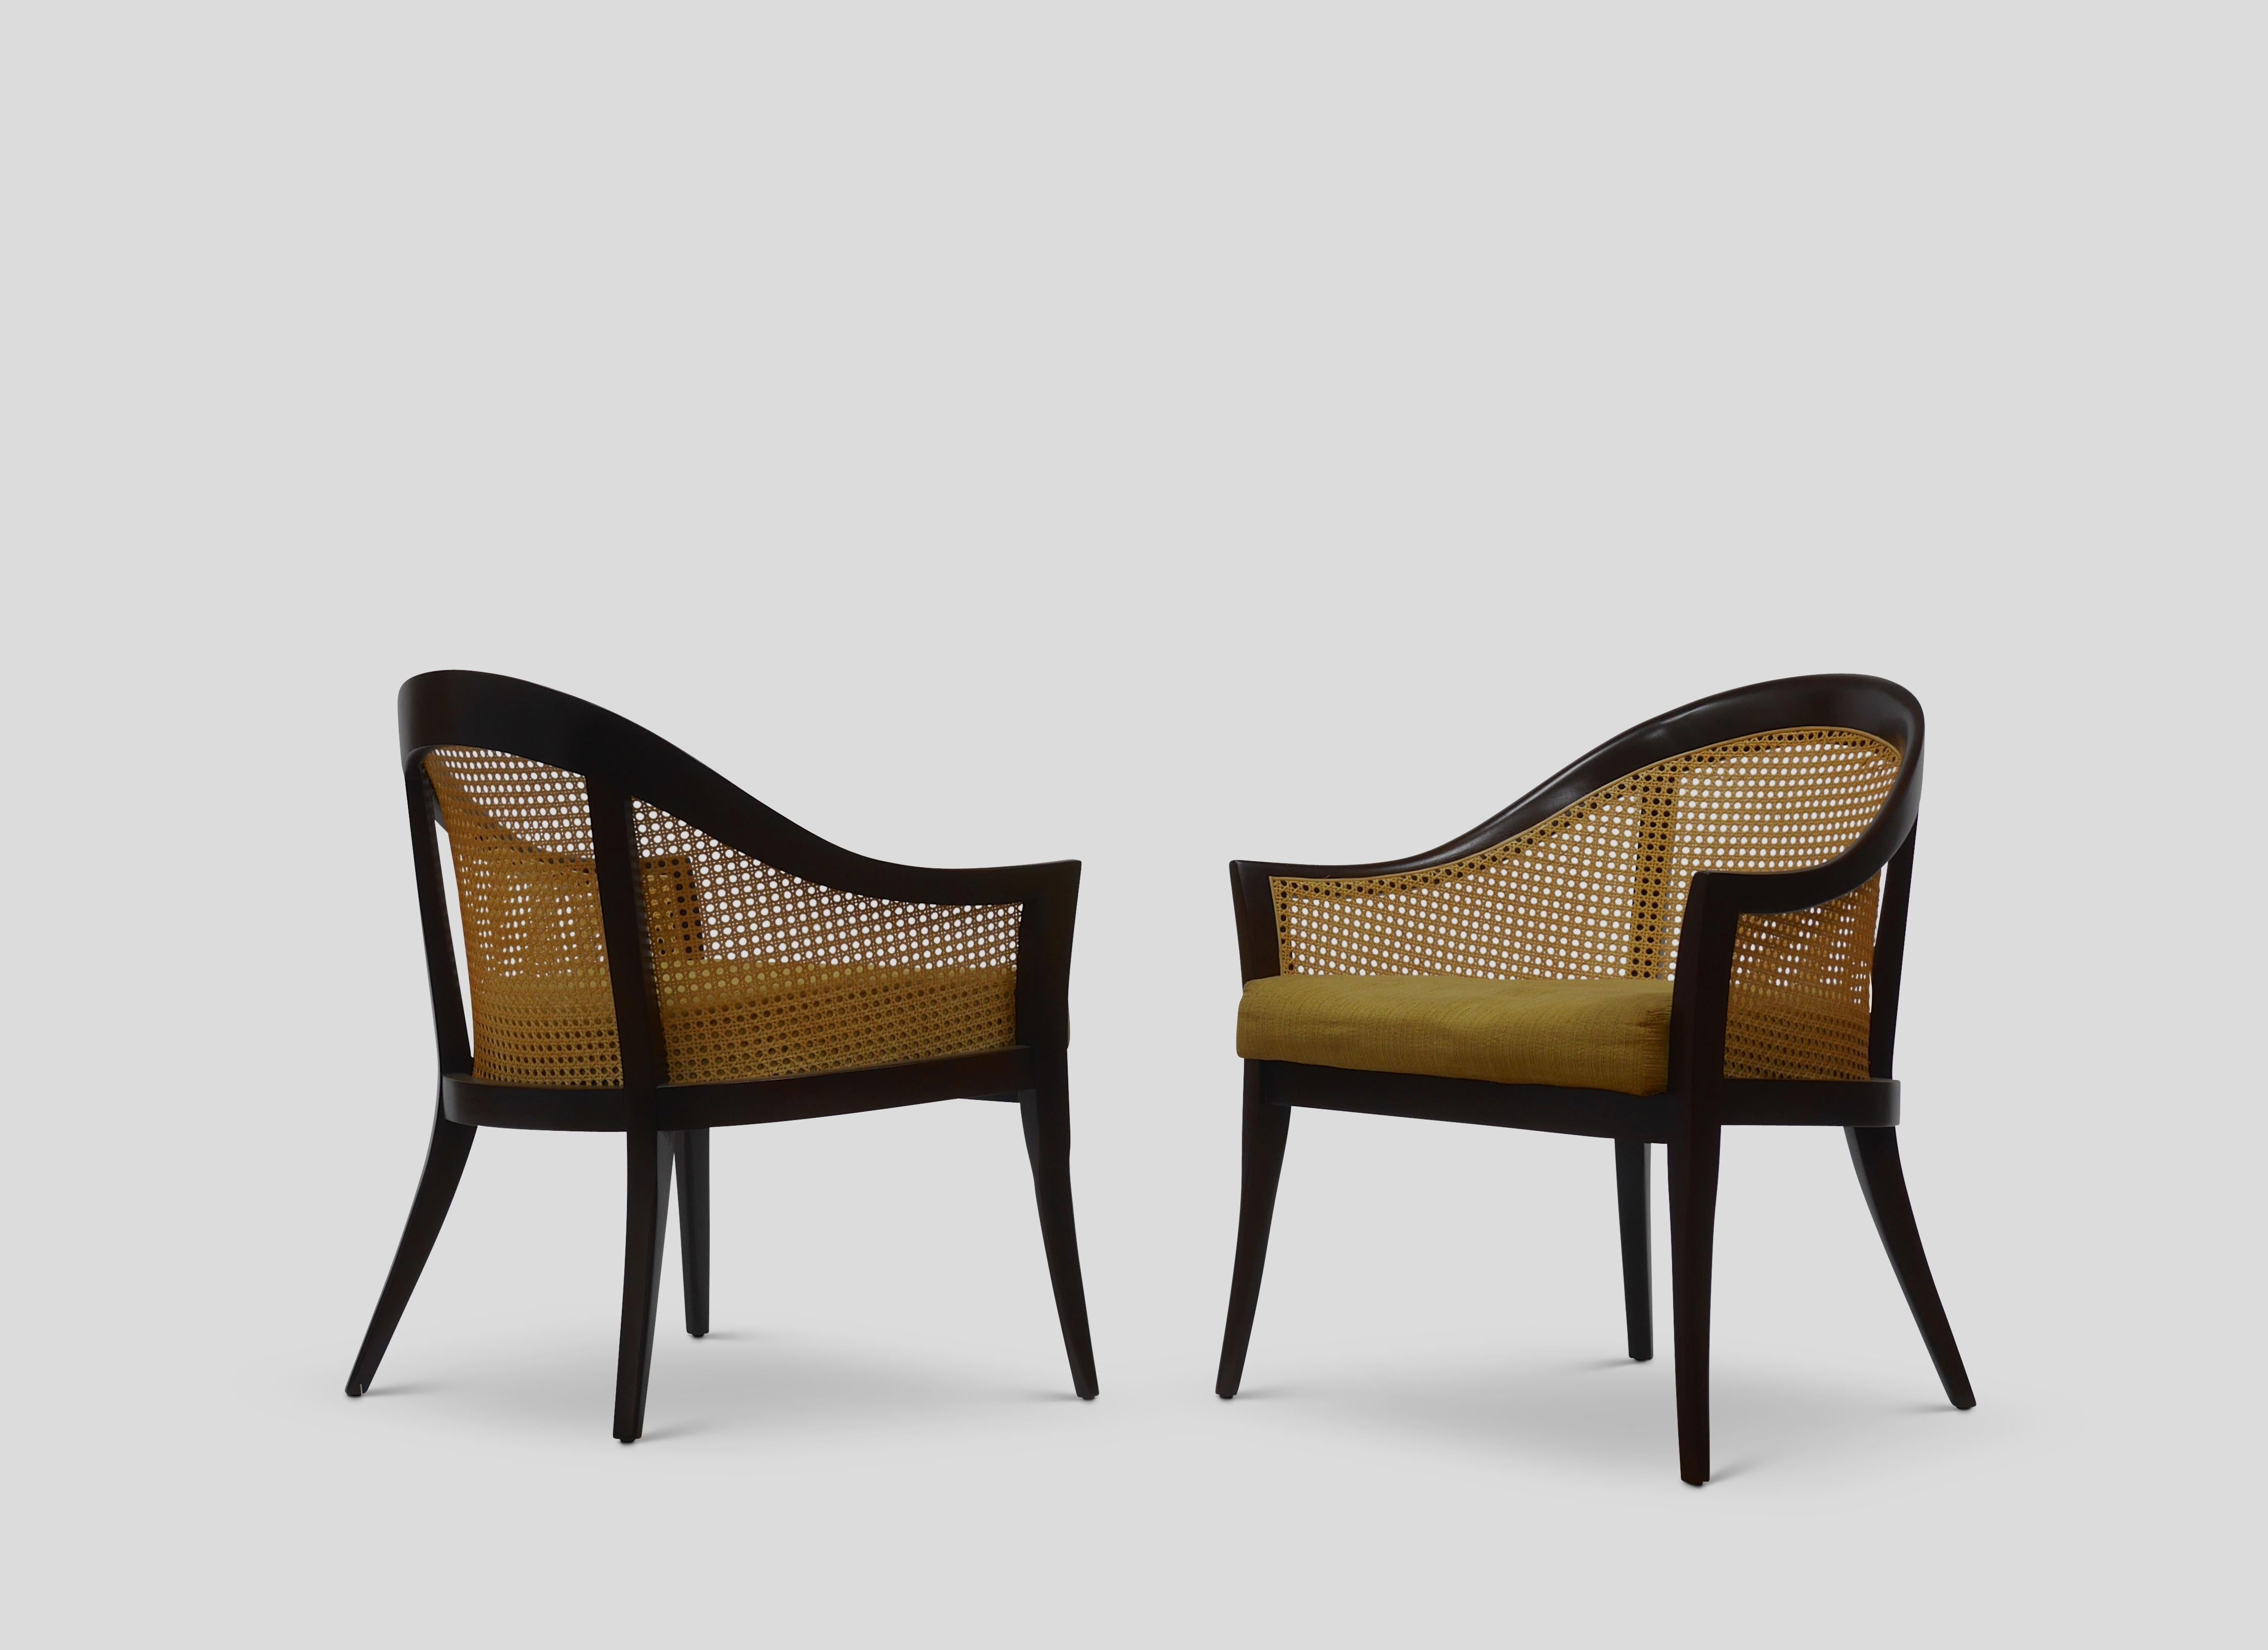 Pair of sculptural, elegant lounge chairs No. 915 in mahogany with Indian cane backs and upholstered seats by Harvey Probber, American 1950s.
Refinished and re caned. Price quoted includes re upholstery with client's material.

Measures: H 29.5